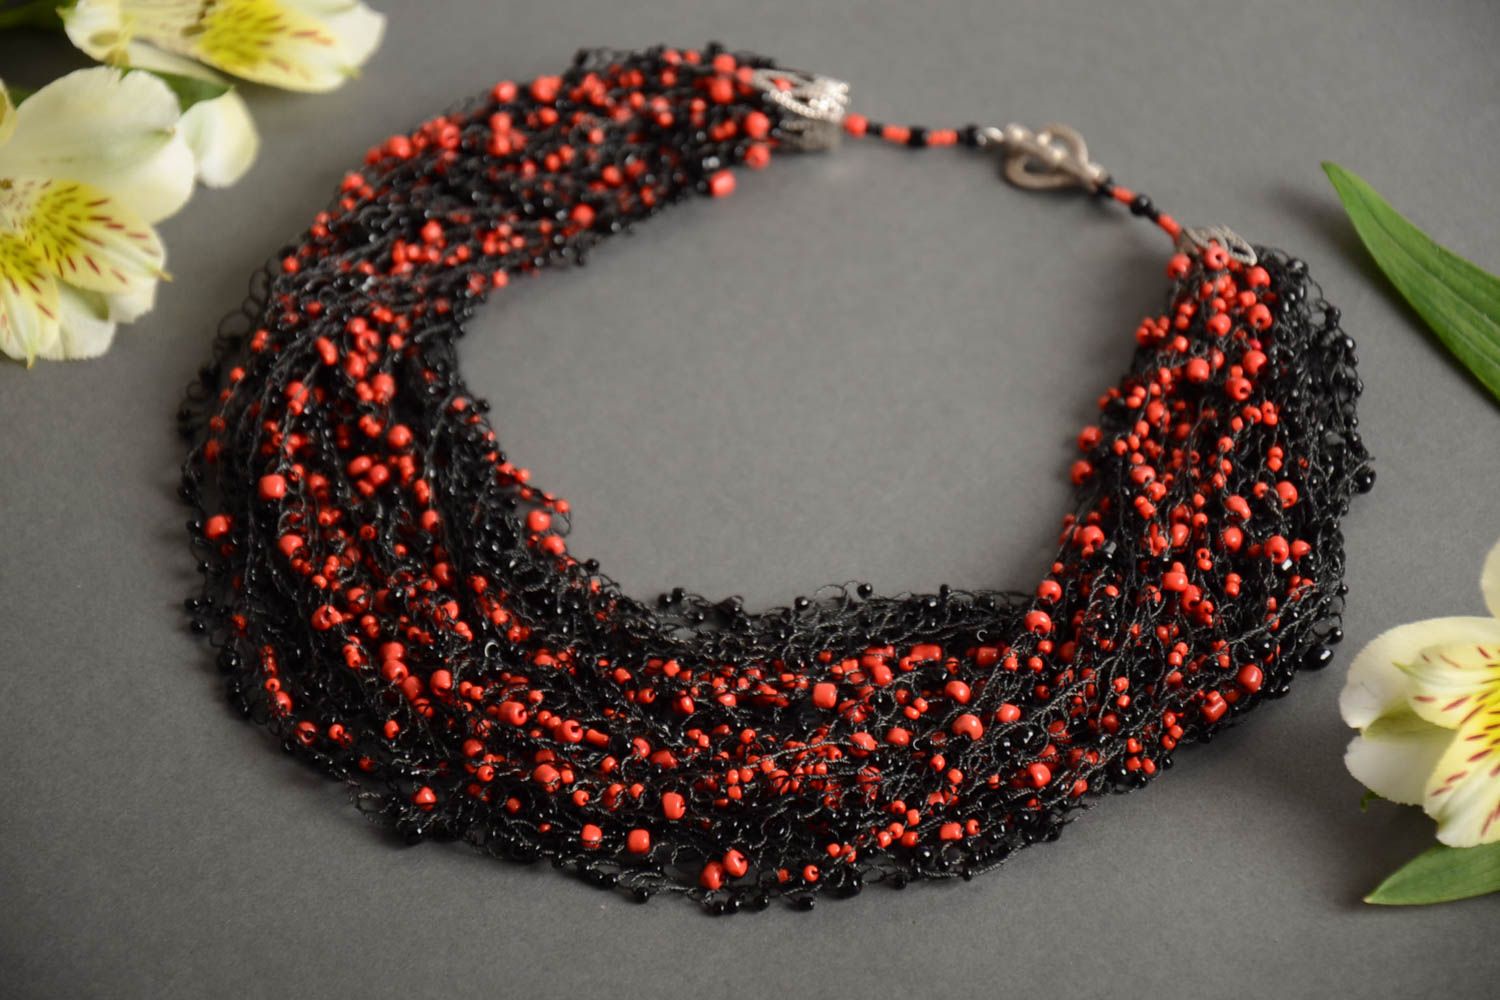 Handmade volume airy expressive necklace crocheted of red and black Czech beads photo 1